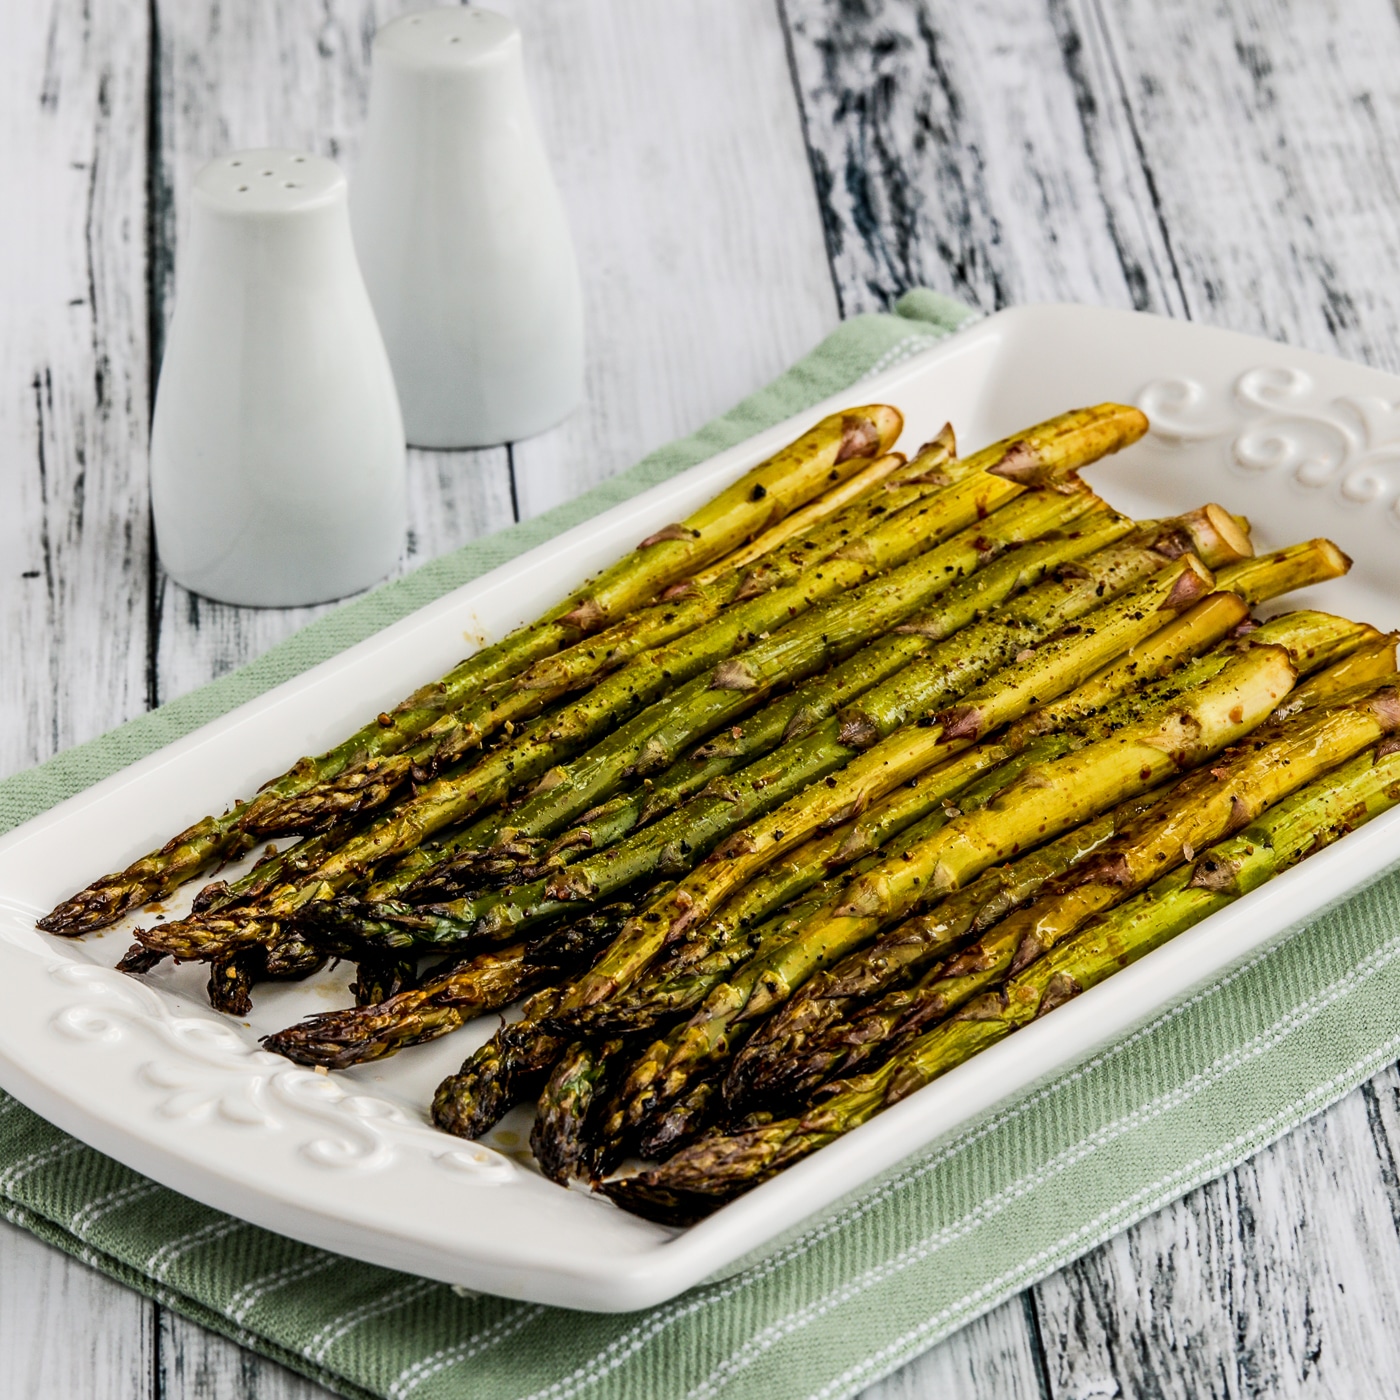 Easy Roasted Asparagus square thumbnail image of finished asparagus on serving platter